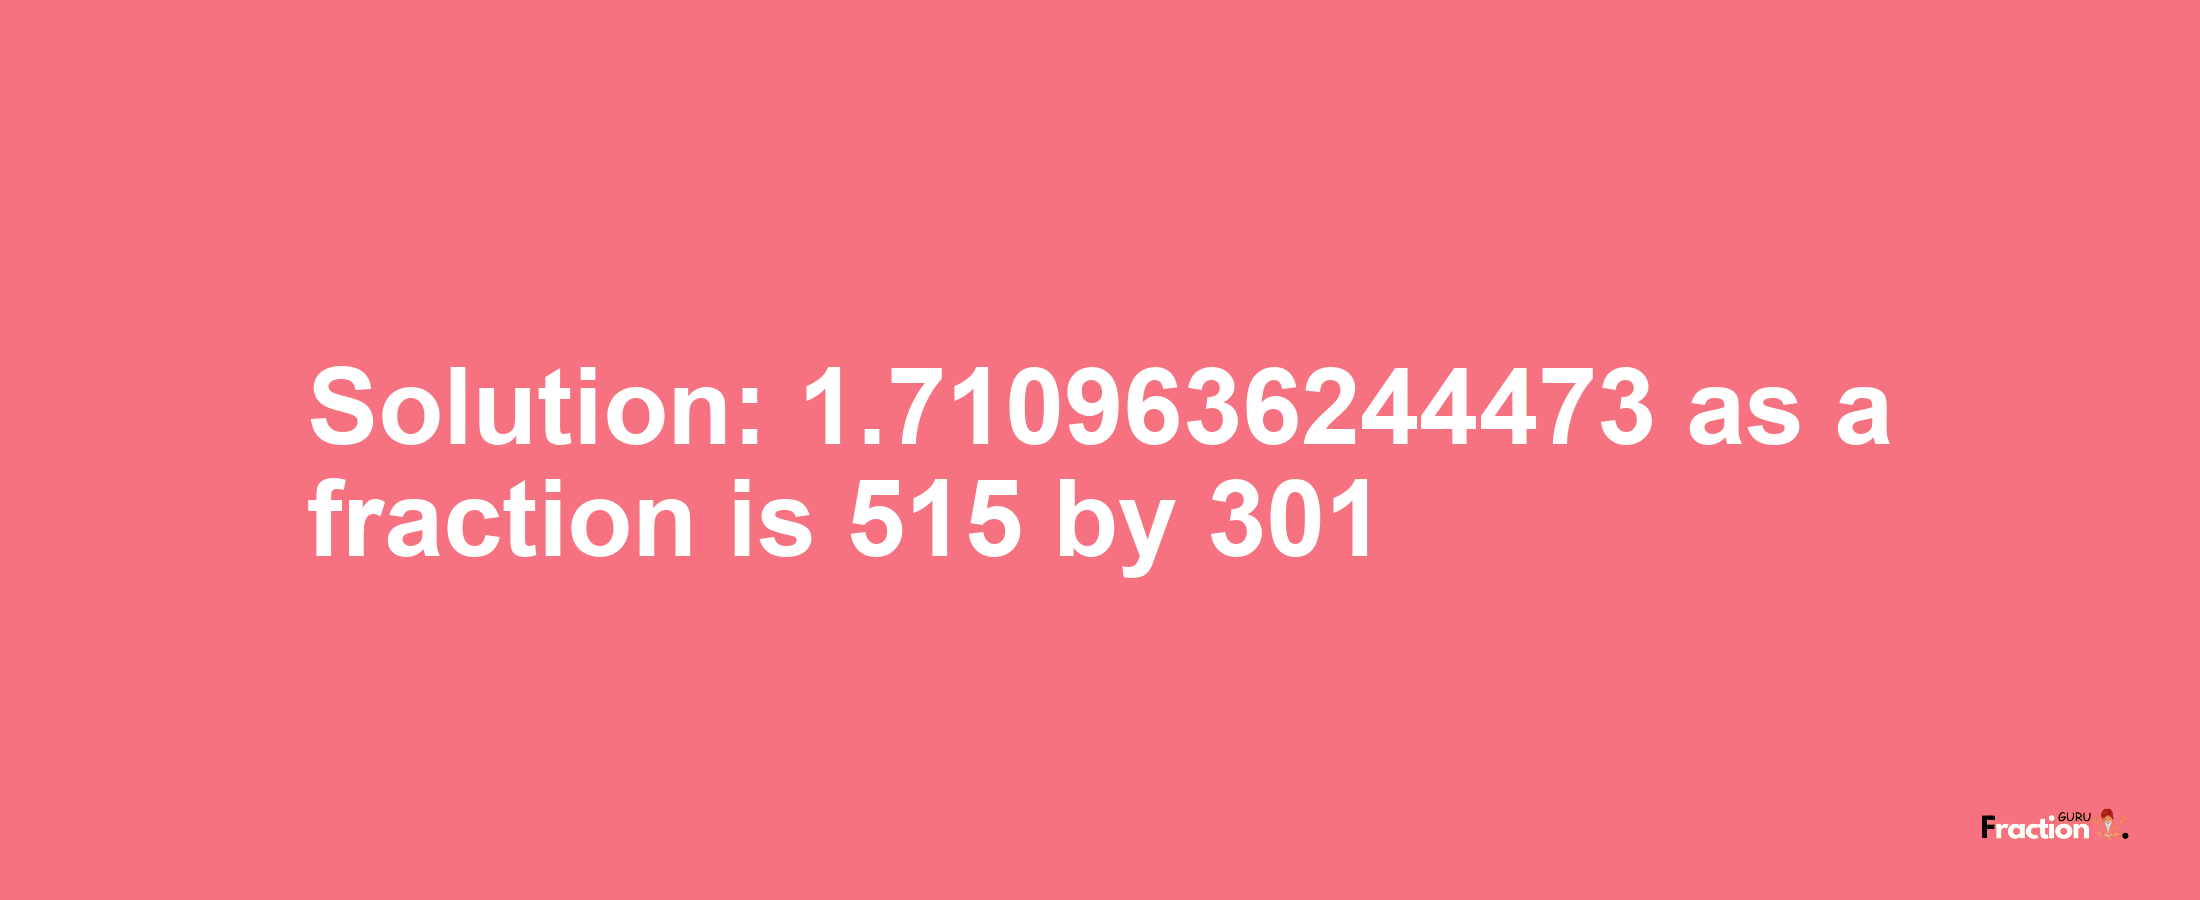 Solution:1.7109636244473 as a fraction is 515/301